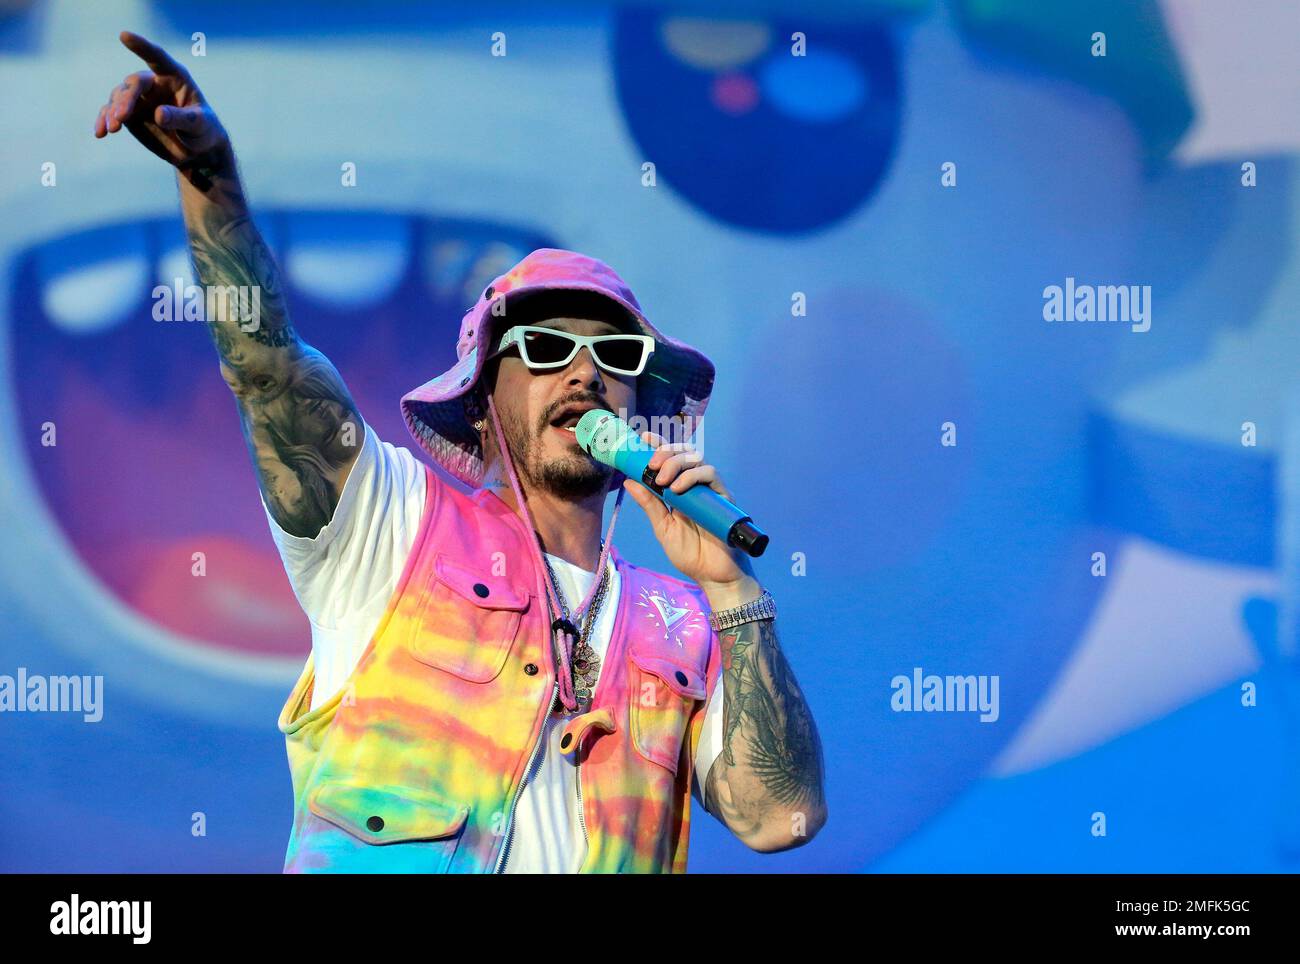 FILE - Singer J Balvin performs during the Coca-Cola Flow Reggaeton  festival in Mexico City on Nov. 23, 2019. Latin trap kings Bad Bunny and J  Balvin have a chance of winning